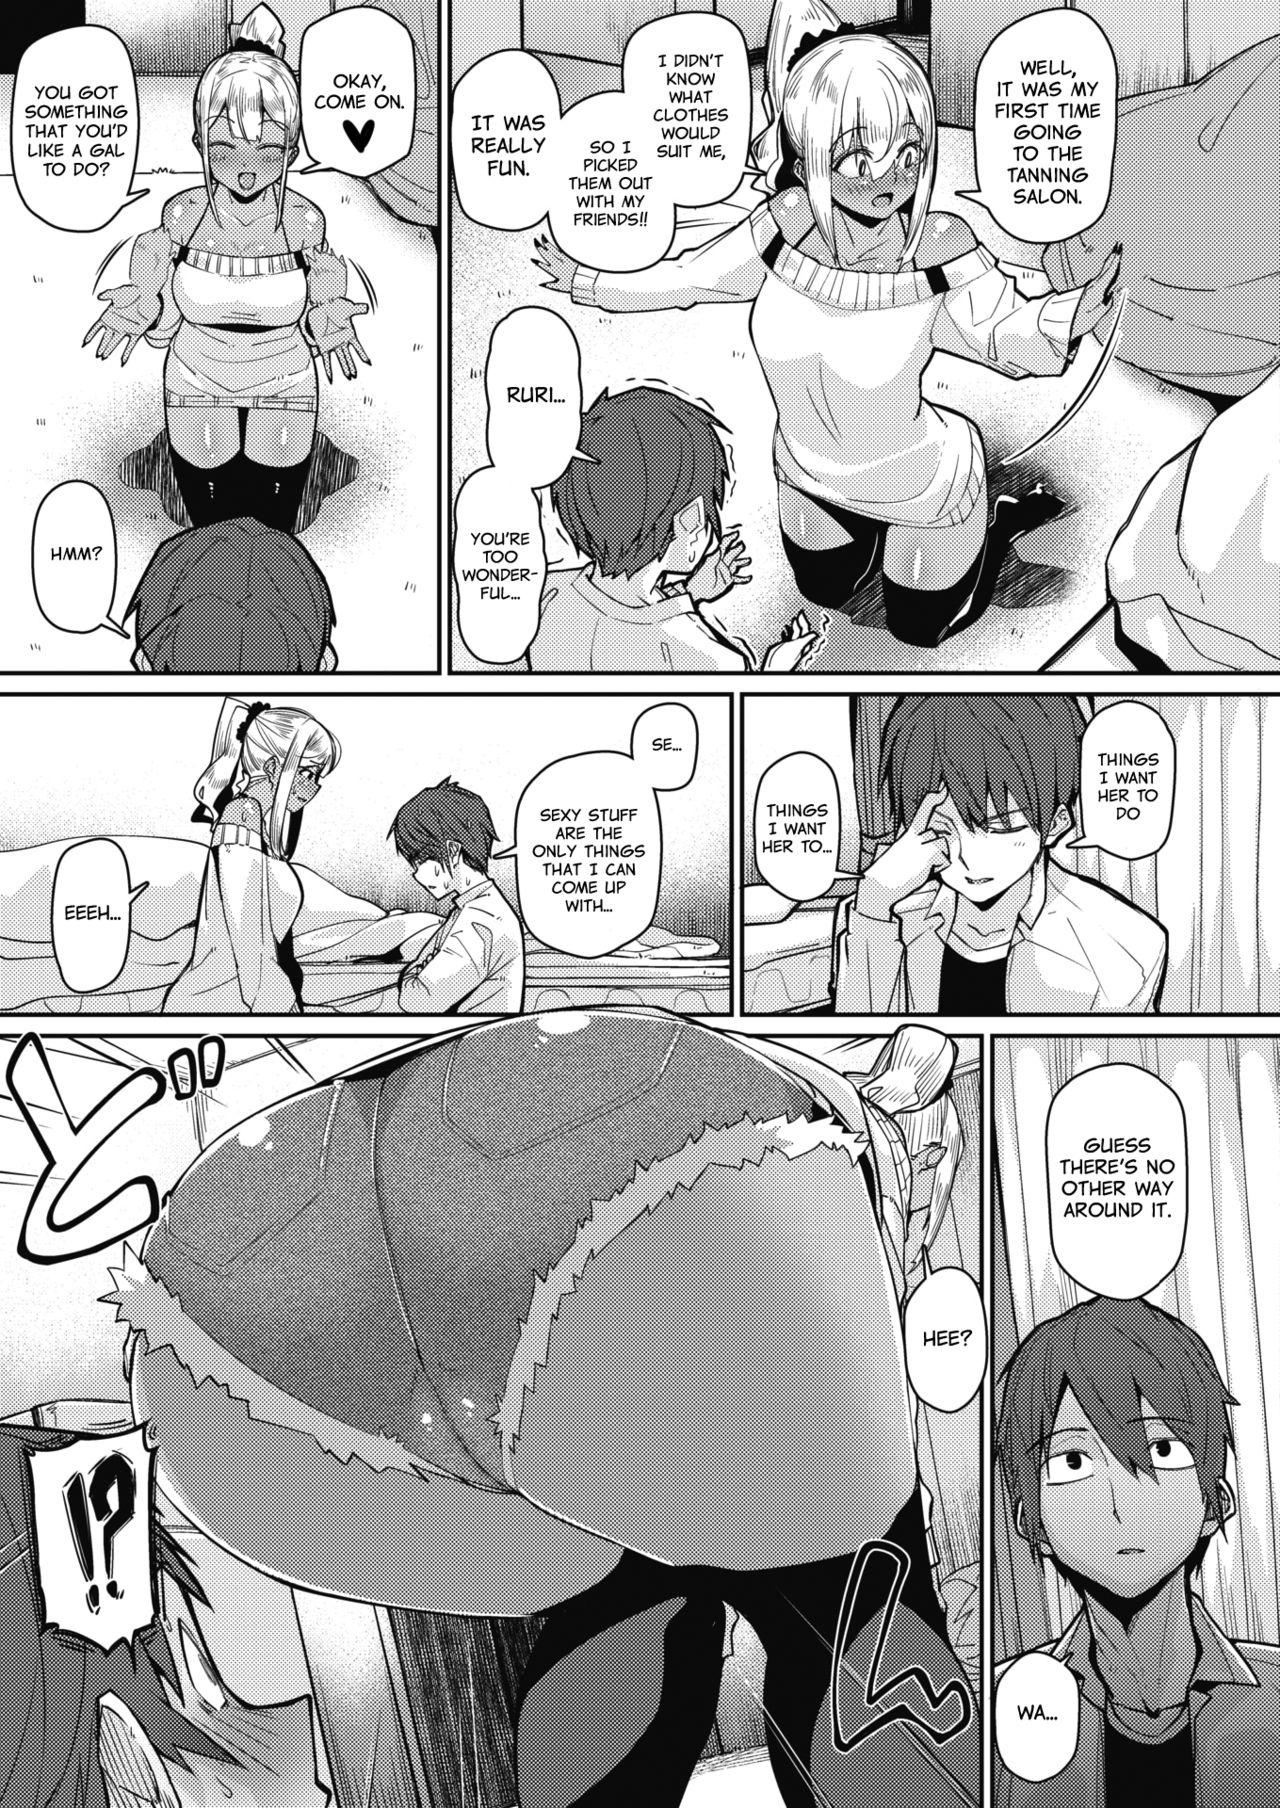 Femboy Gekkan "The Bitch" o Mita Onna no Hannou ni Tsuite | About the Reaction of the Girl Who Saw "The Bitch Monthly" Bed - Page 5